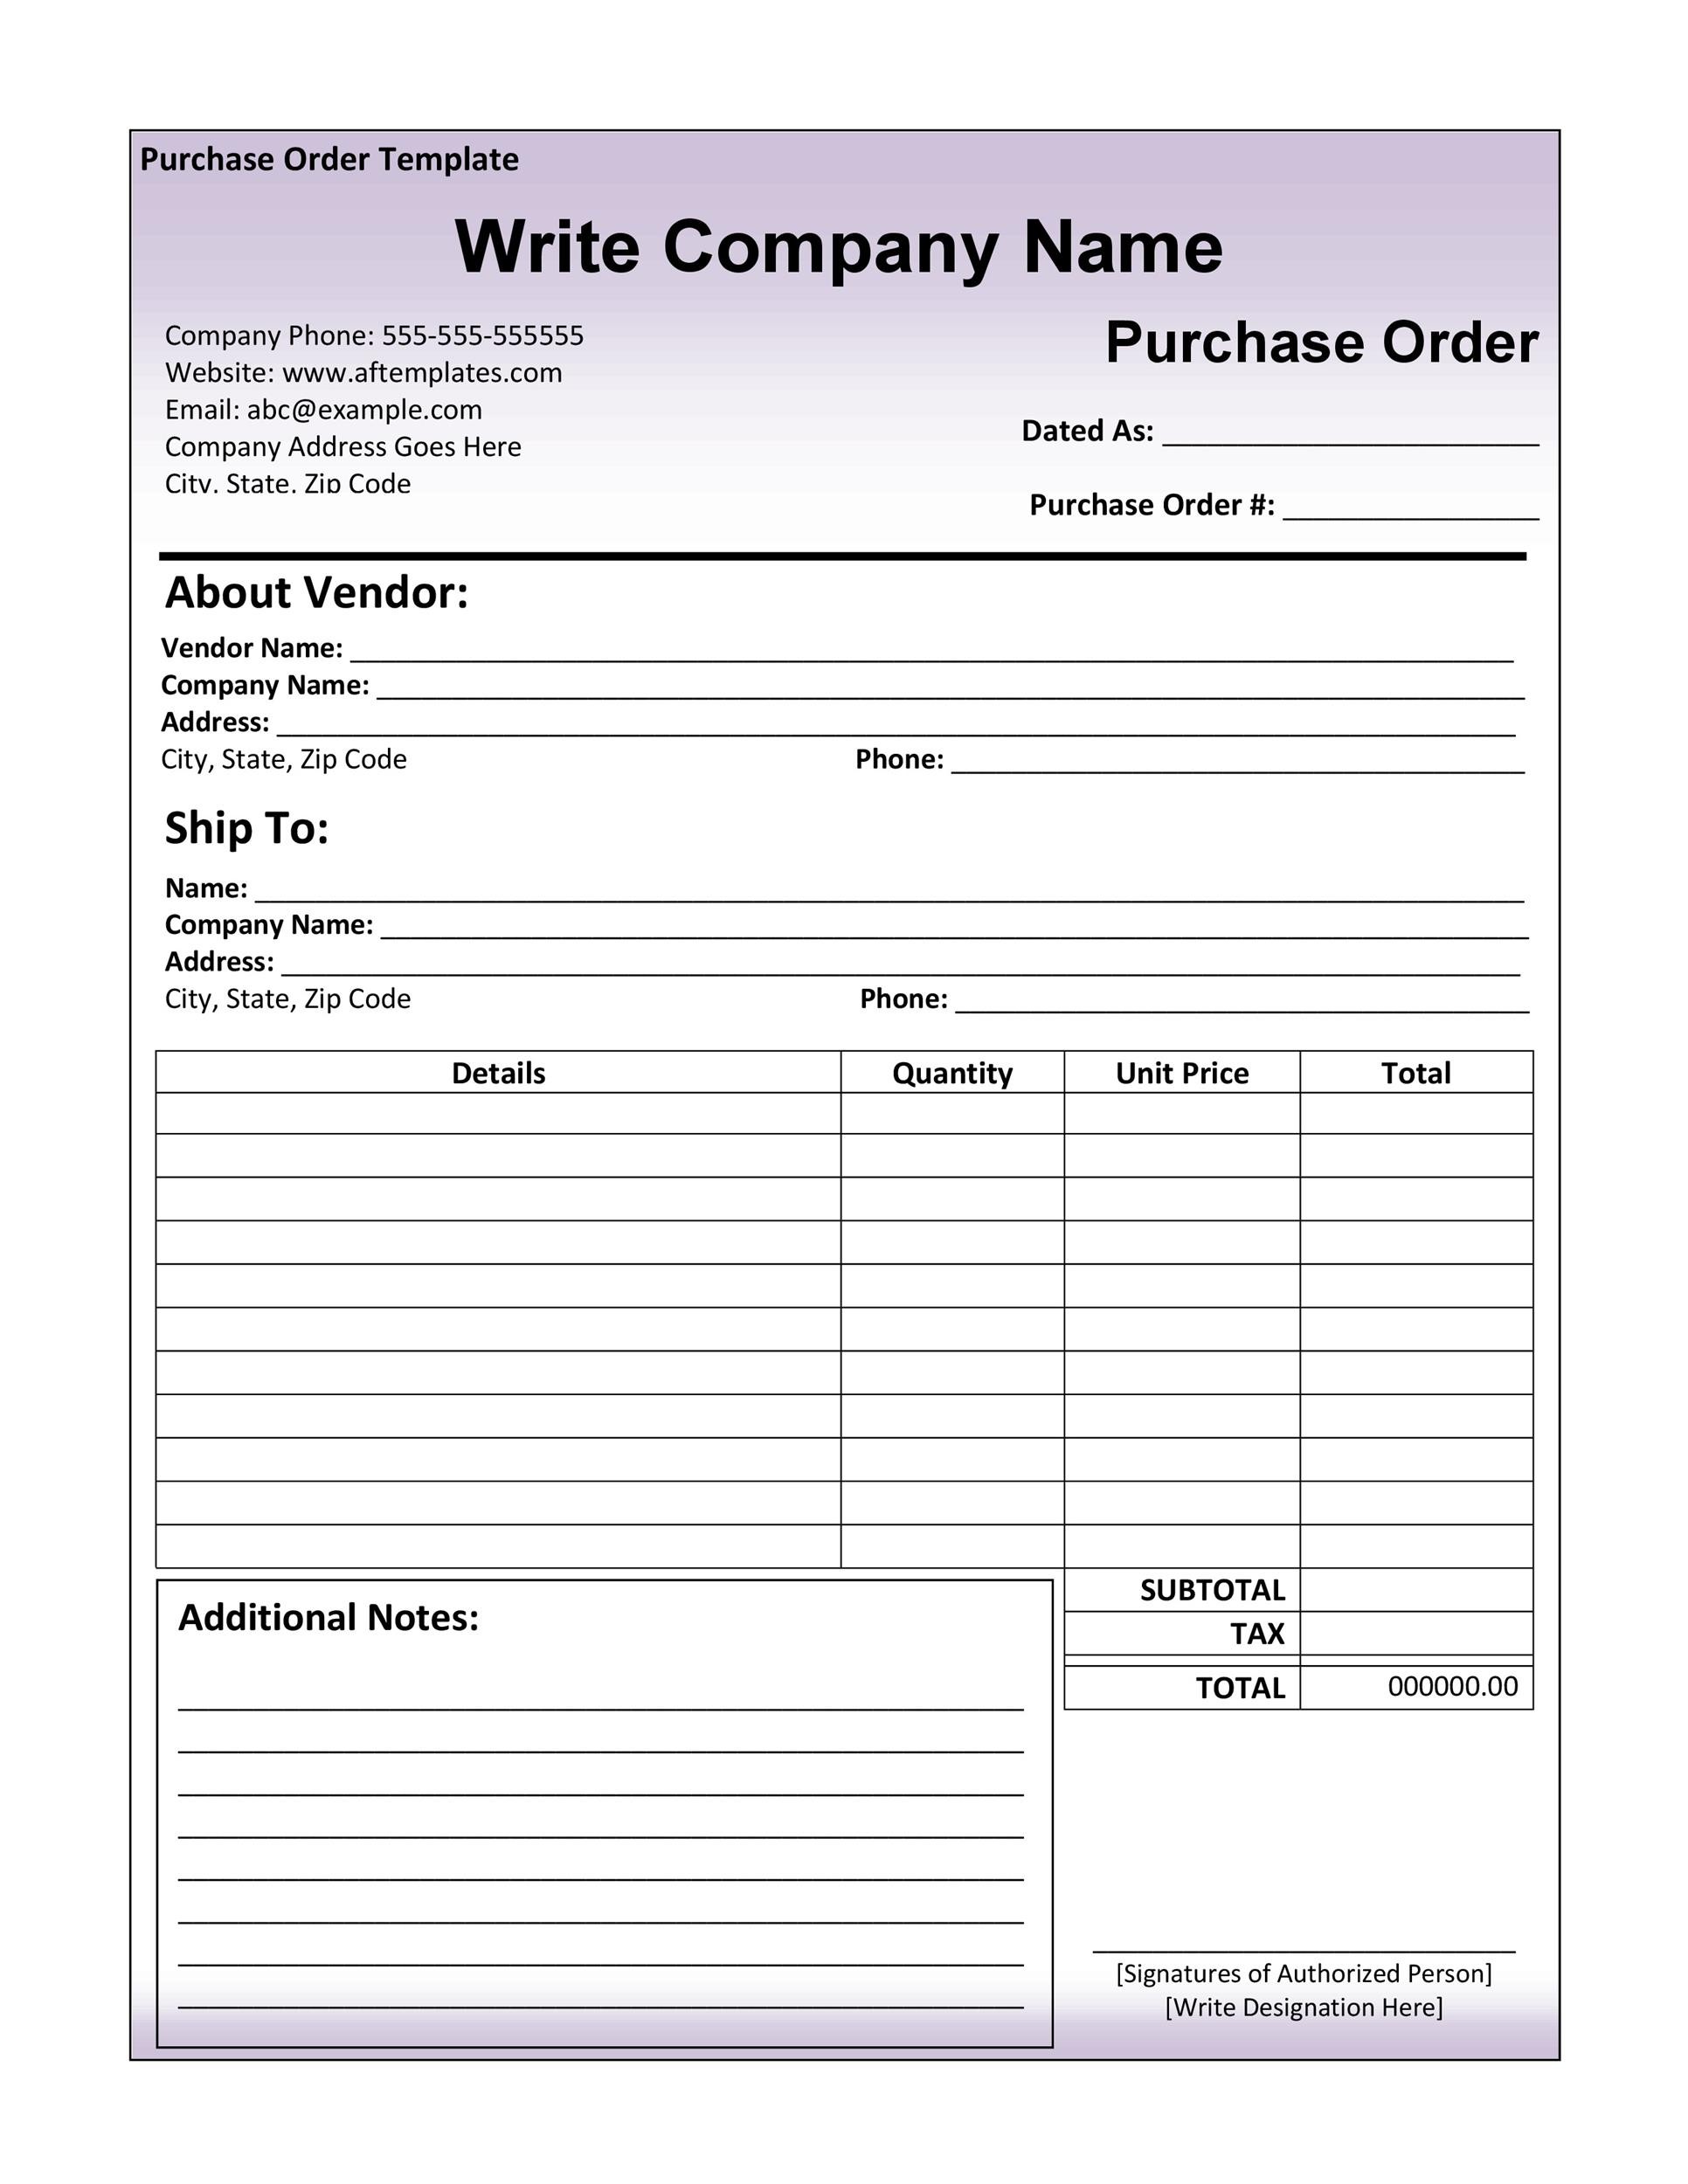 Free Purchase Requisition Template Excel Master of Documents